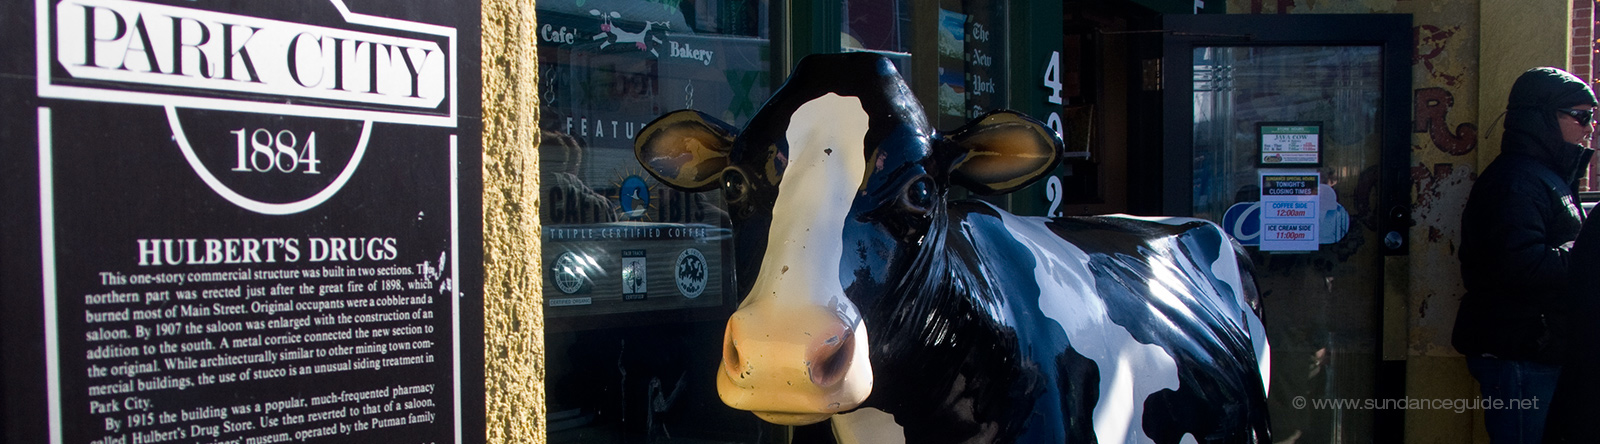 A picture of a cow sculpture on the street in Park City, Utah